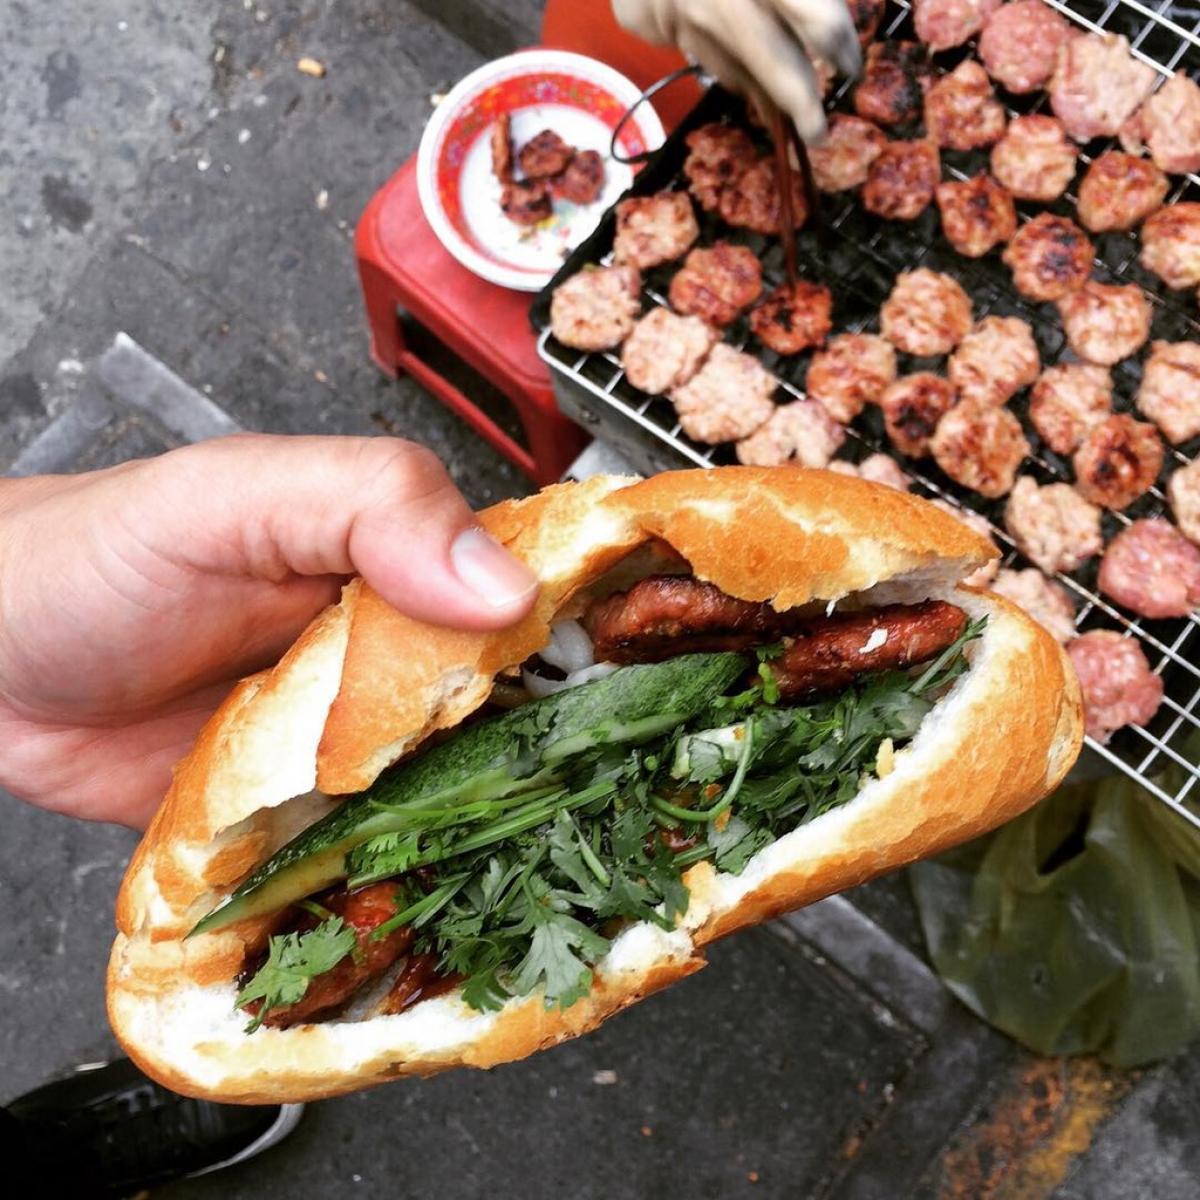 The grilled meat from this stand is quite different from the others and is a delicious snack for visitors. (Photo: Lukenguyencooks)